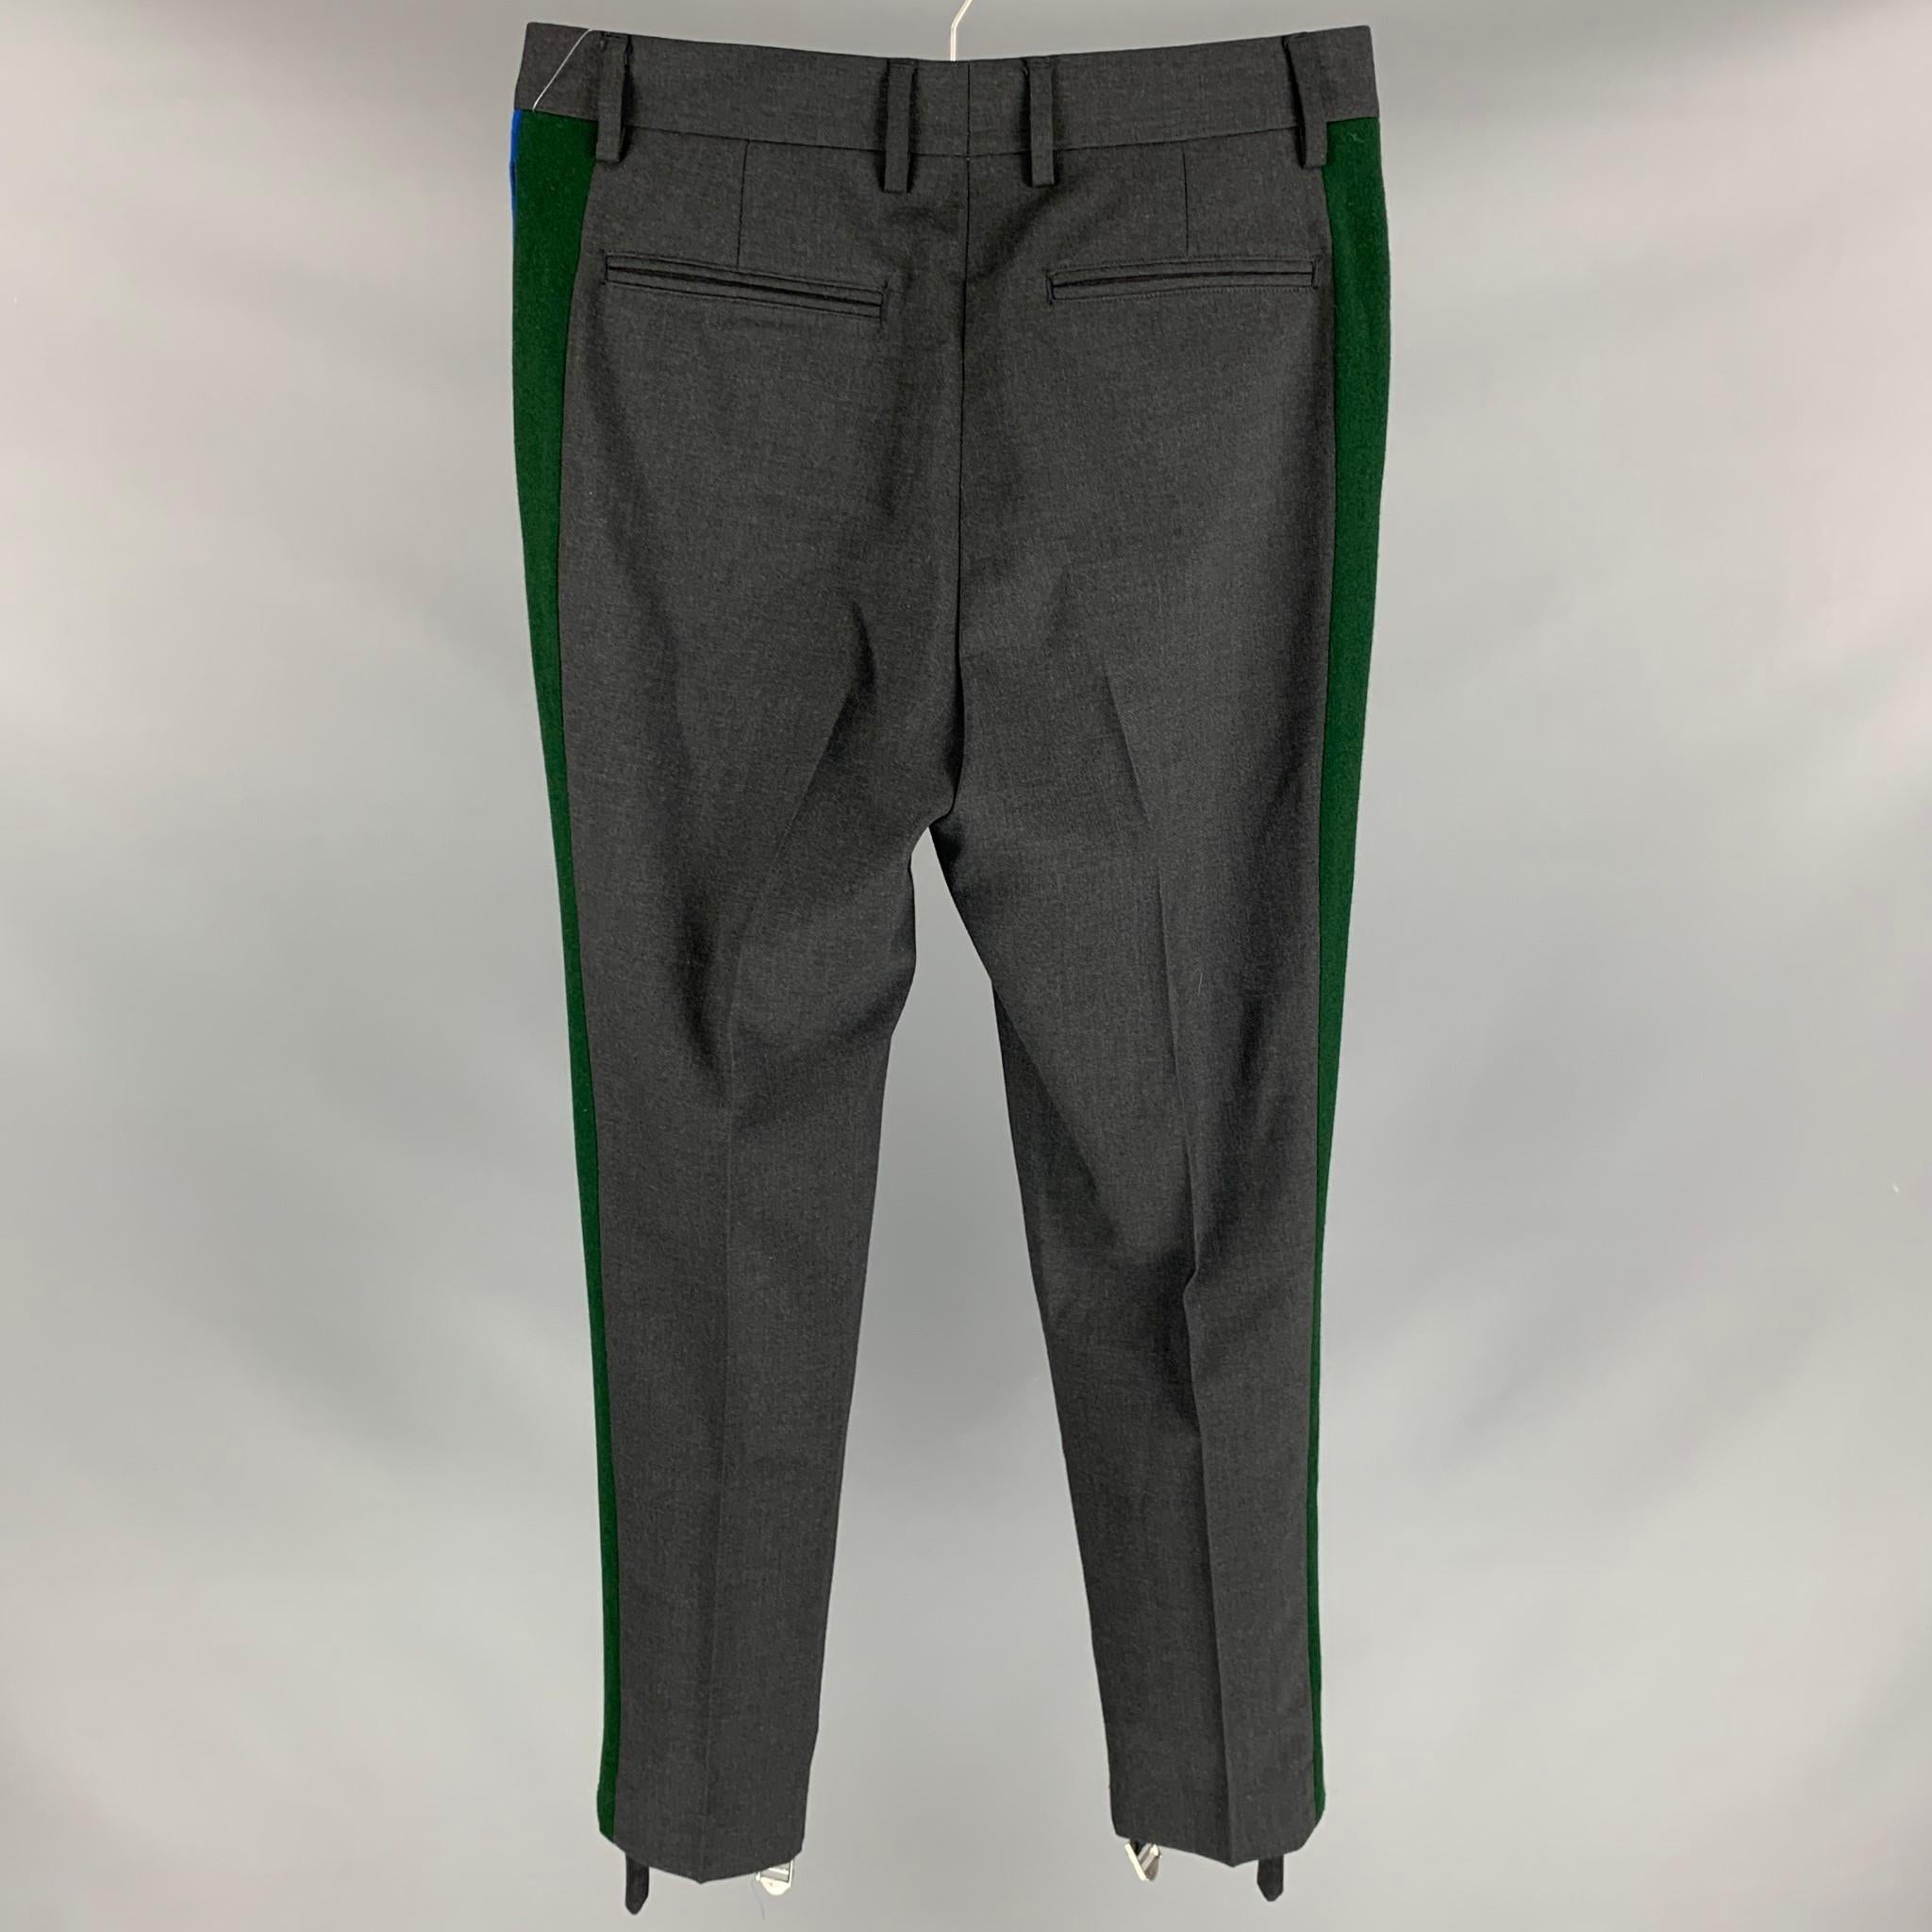 STELLA McCARTNEY tuxedo dress pants comes in a charcoal wool with a green & blue side stripe featuring a stirrup buckle closure detail, slim fit, and a zip fly closure. Made in Italy. 
 
Excellent Pre-Owned Condition.
Marked: